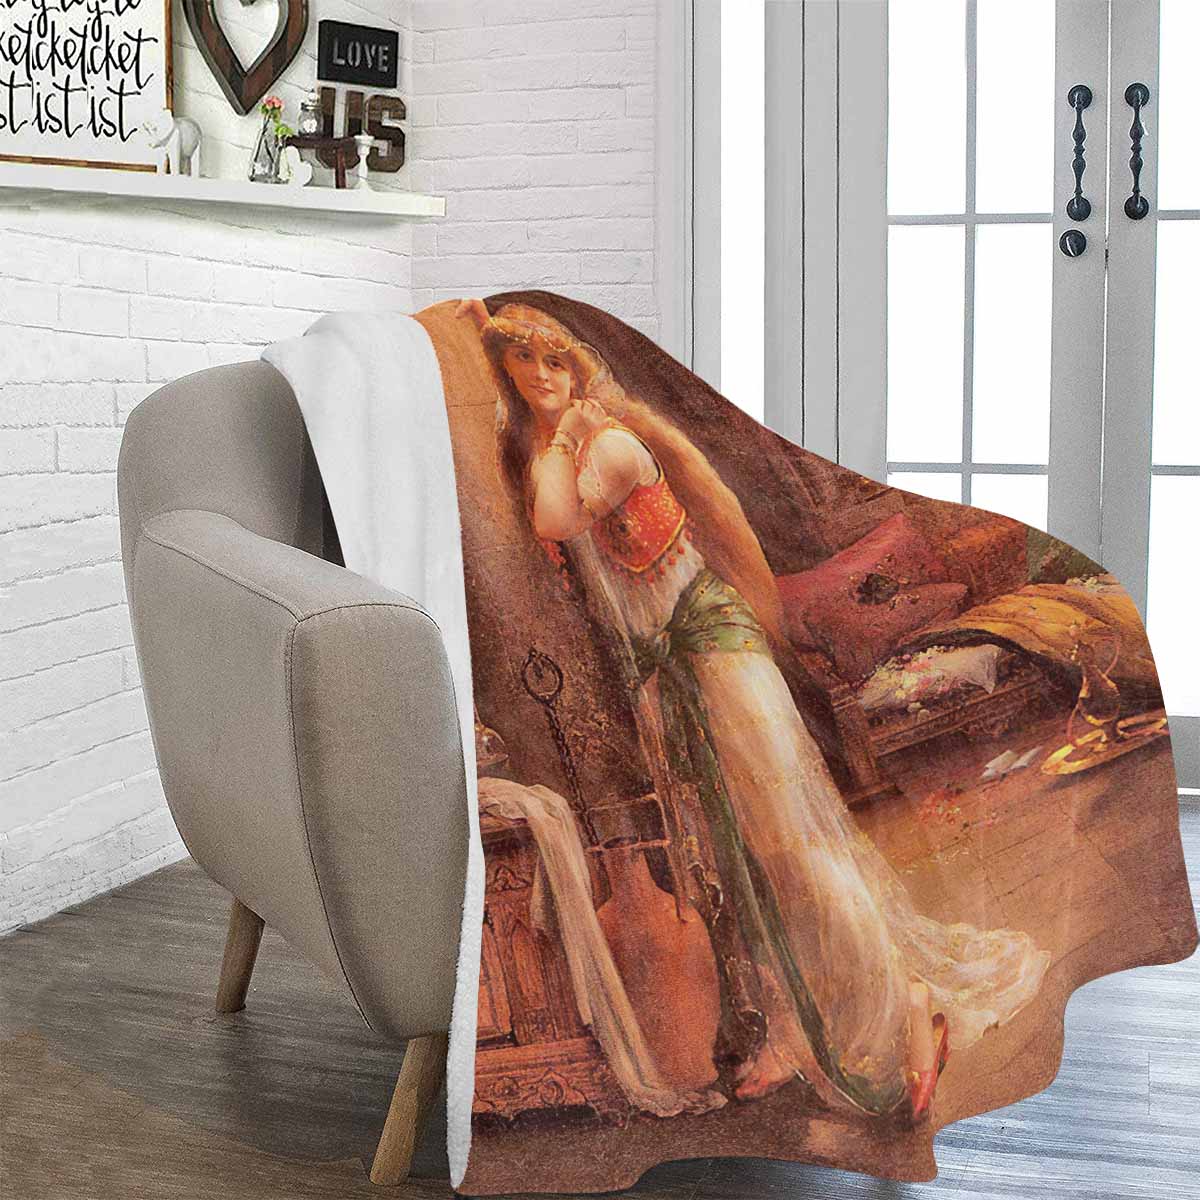 Victorian Lady Design BLANKET, LARGE 60 in x 80 in, The Secret Message